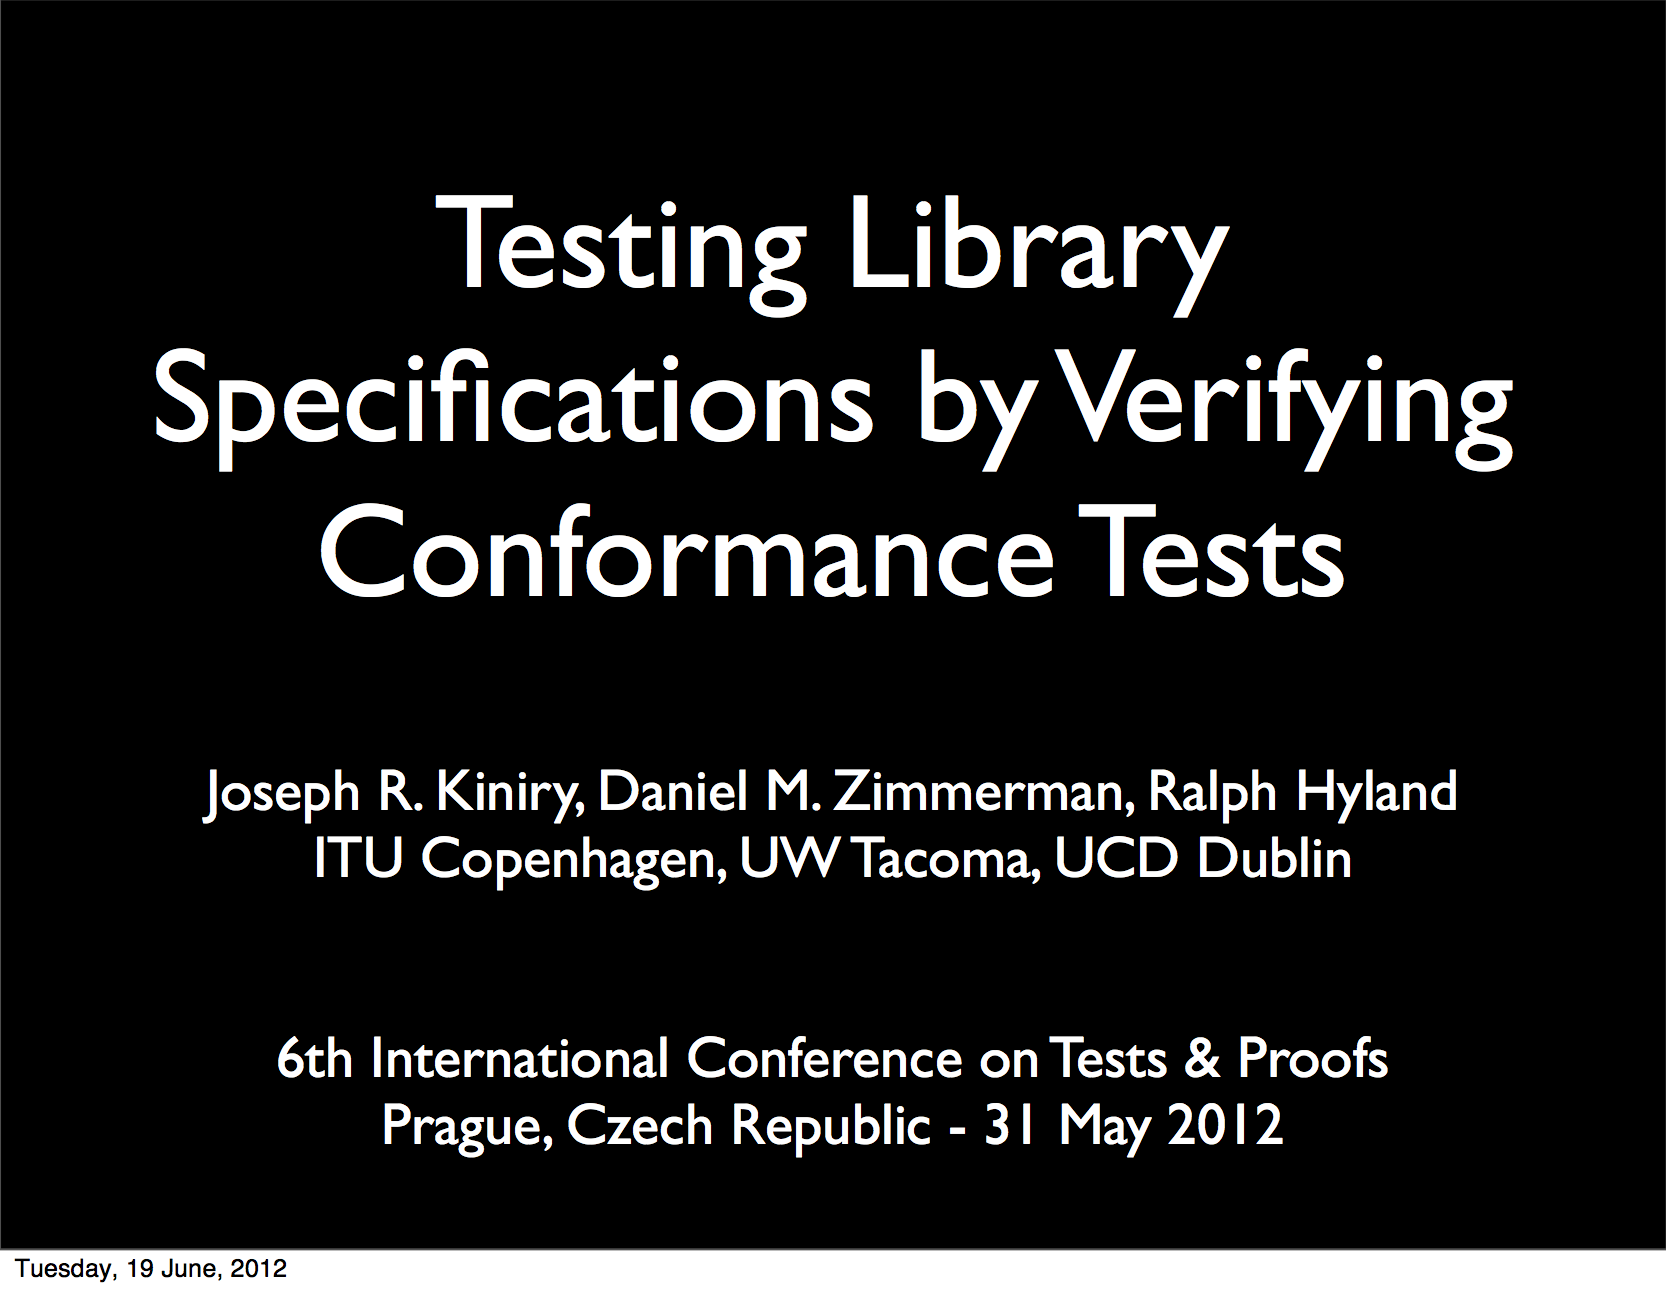 Testing Library Specifications
         by Verifying Conformance Tests